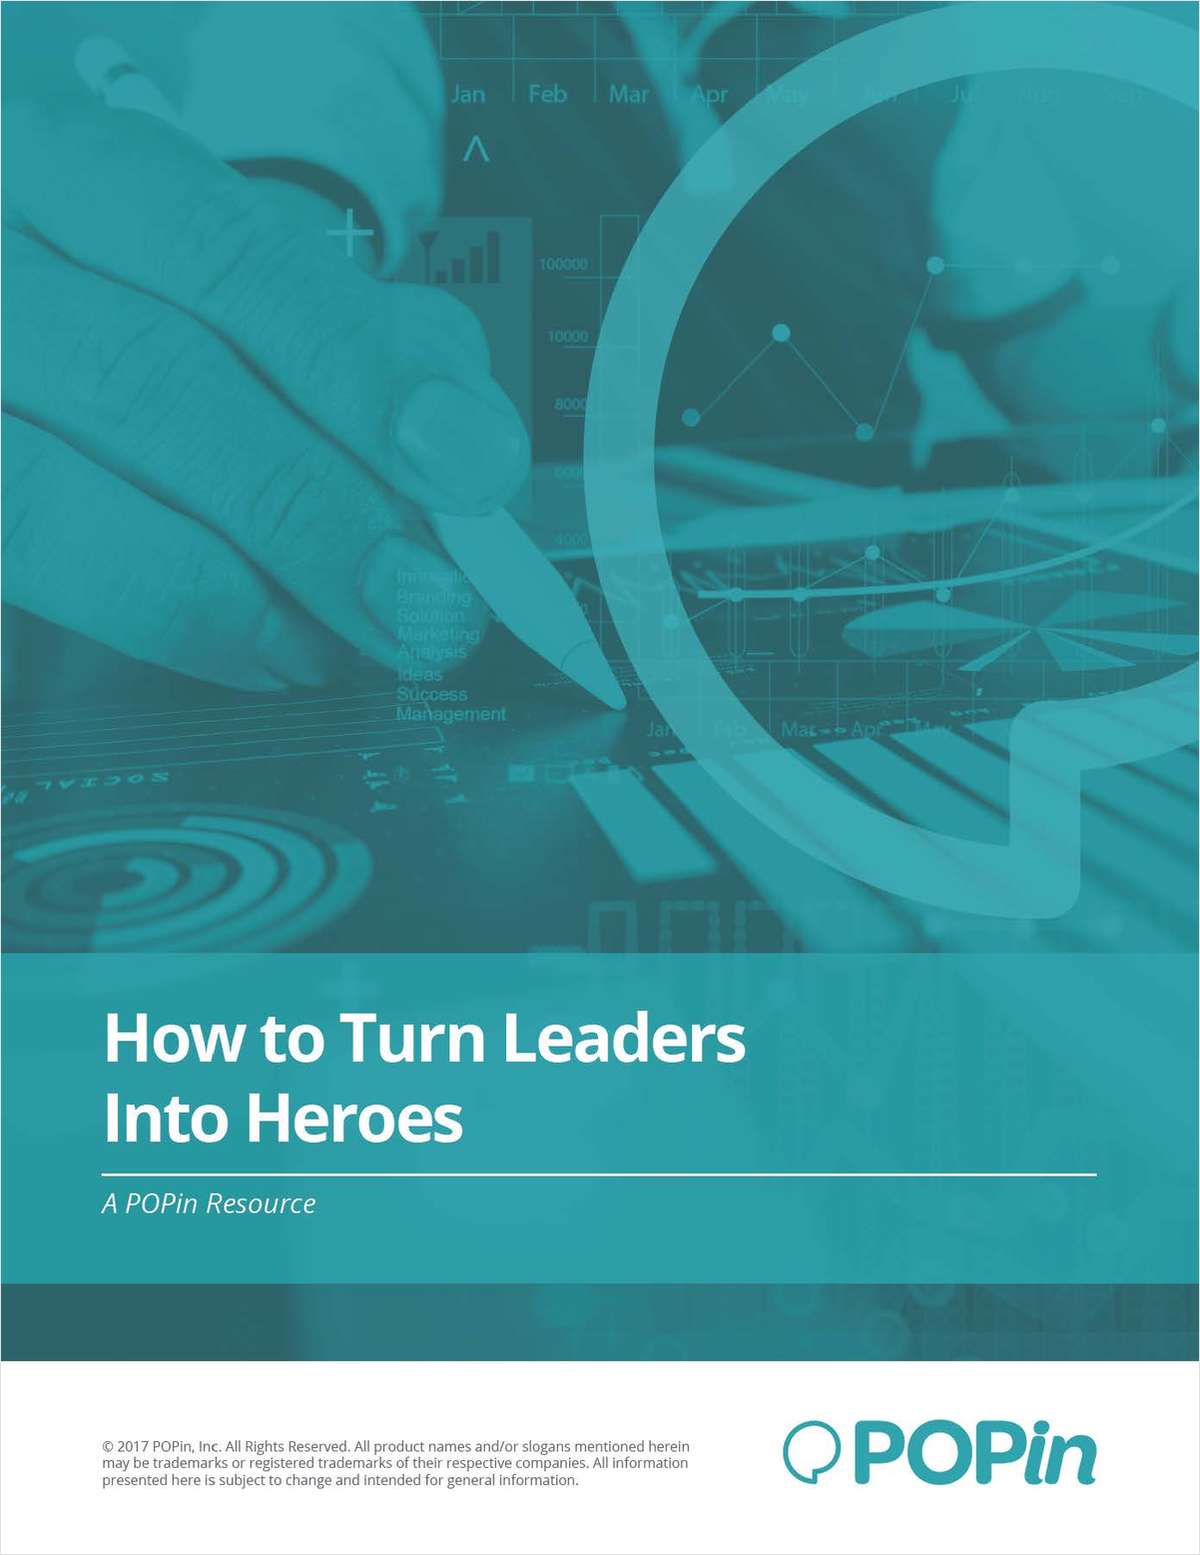 How to Turn Leaders into Heroes